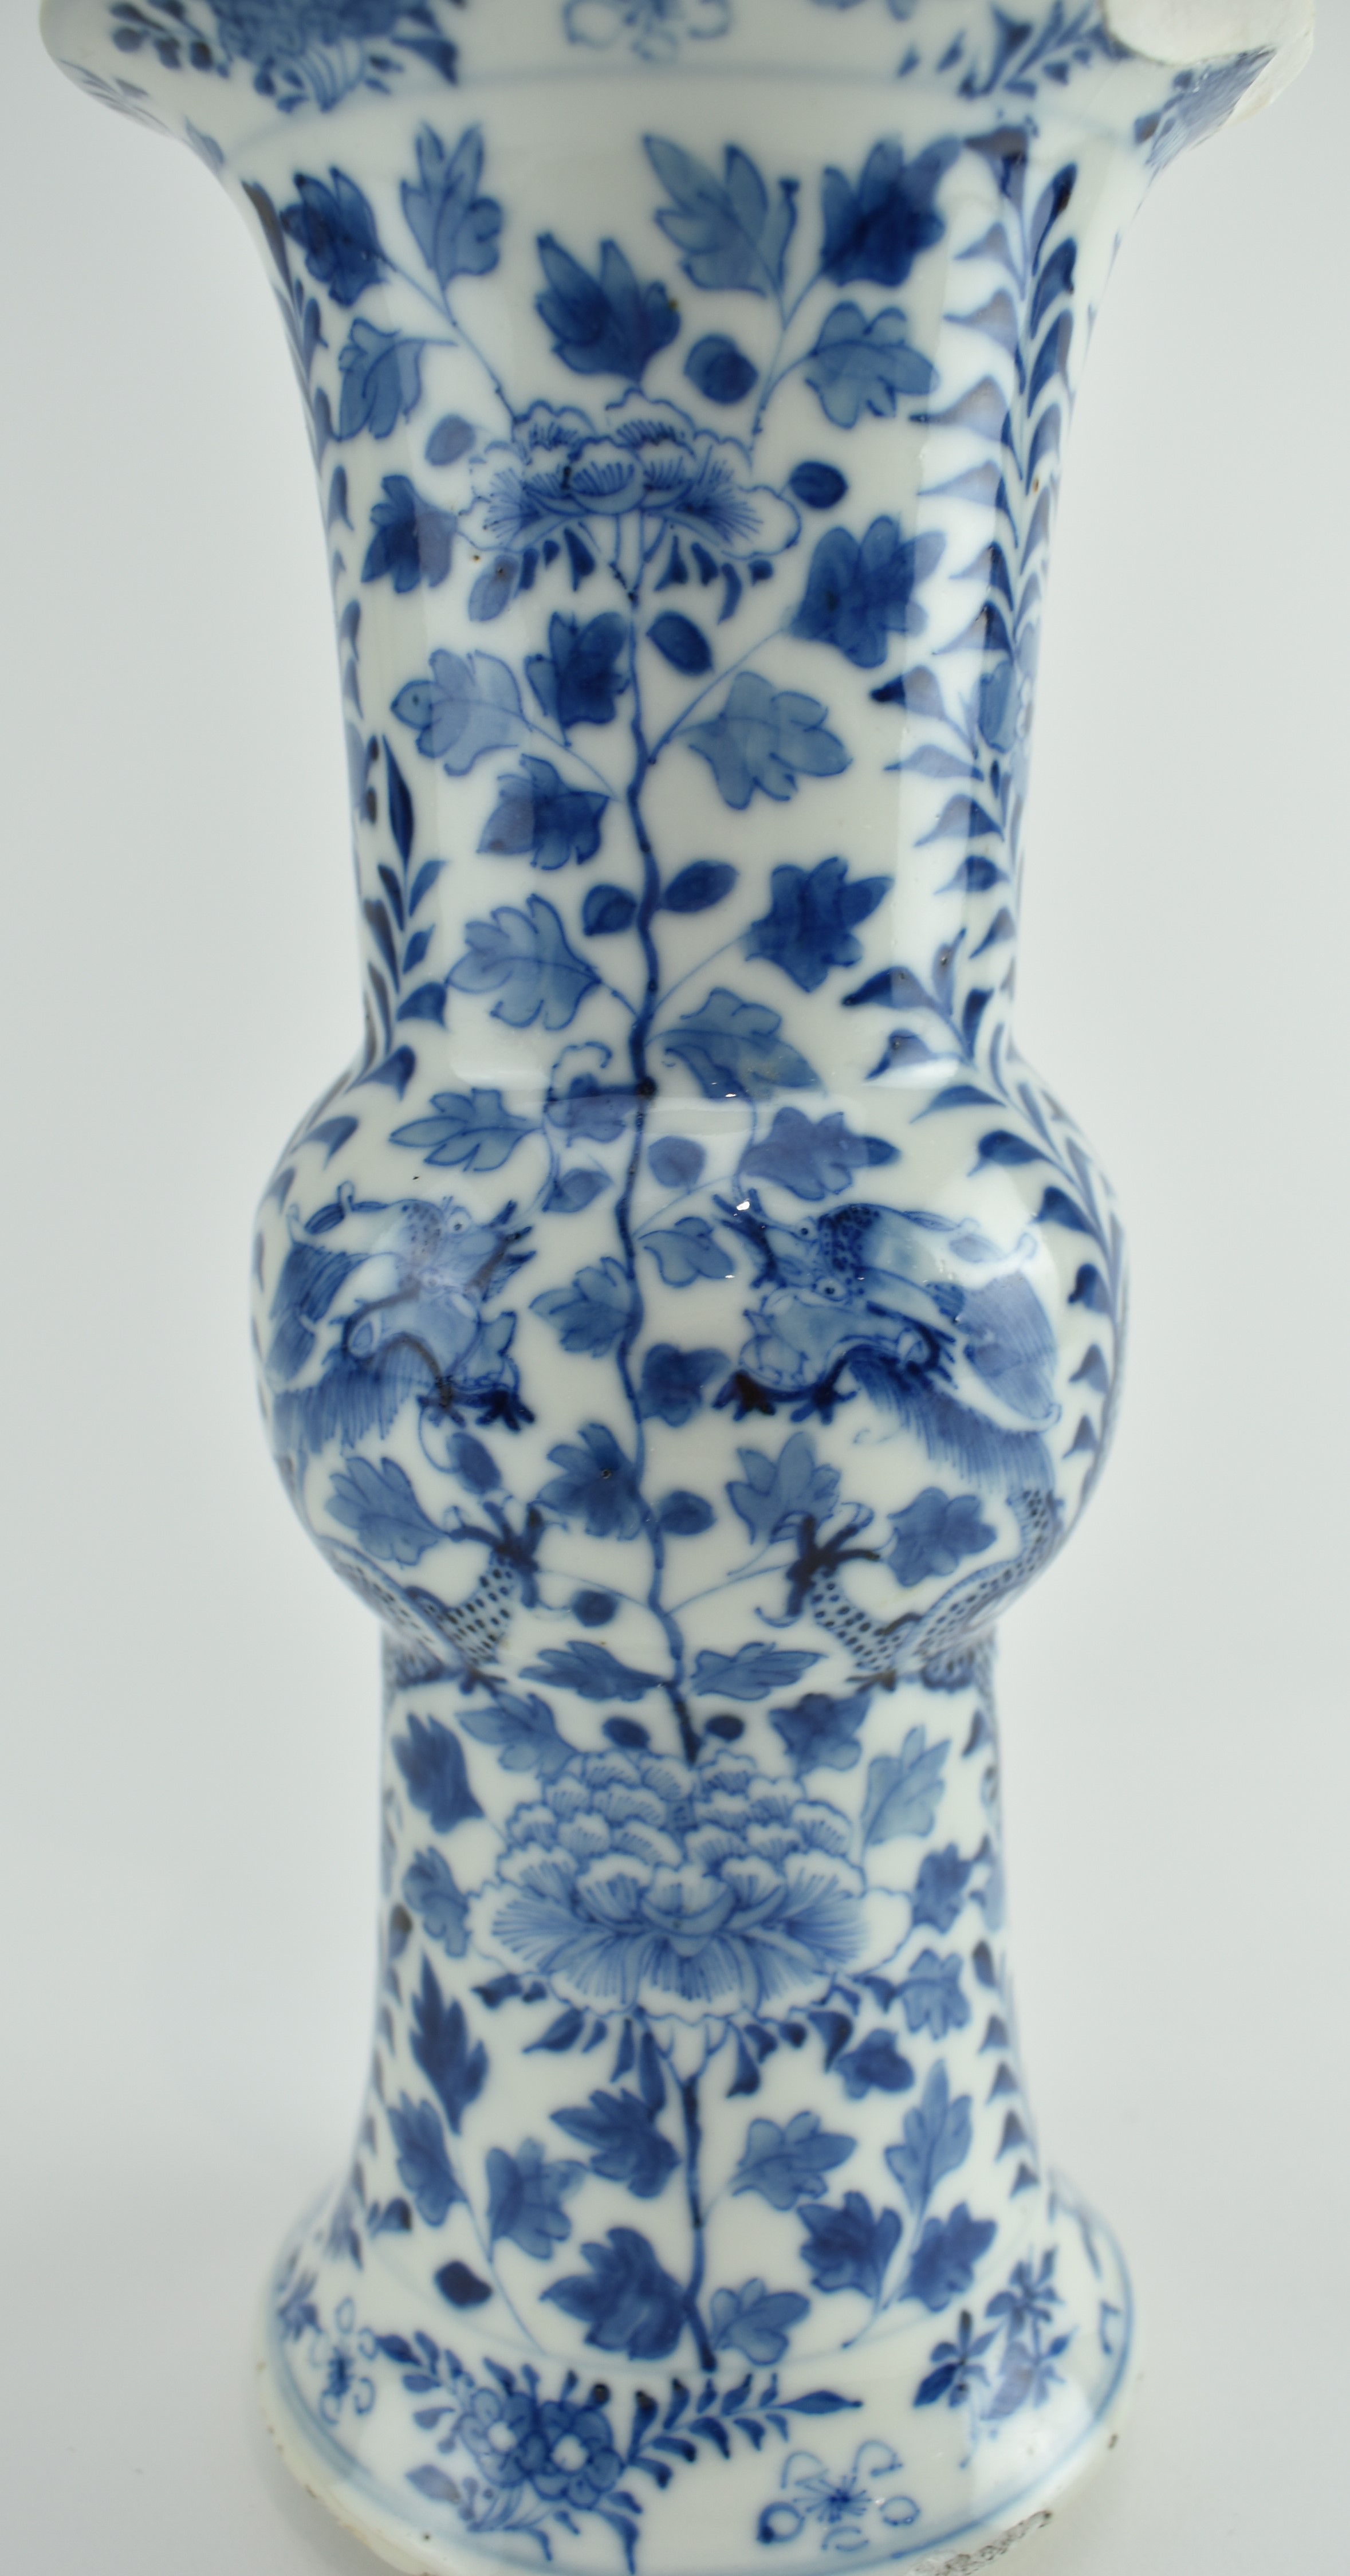 EARLY 20TH CENTURY BLUE AND WHITE DOUBLE DRAGONS GU VASE - Image 5 of 7